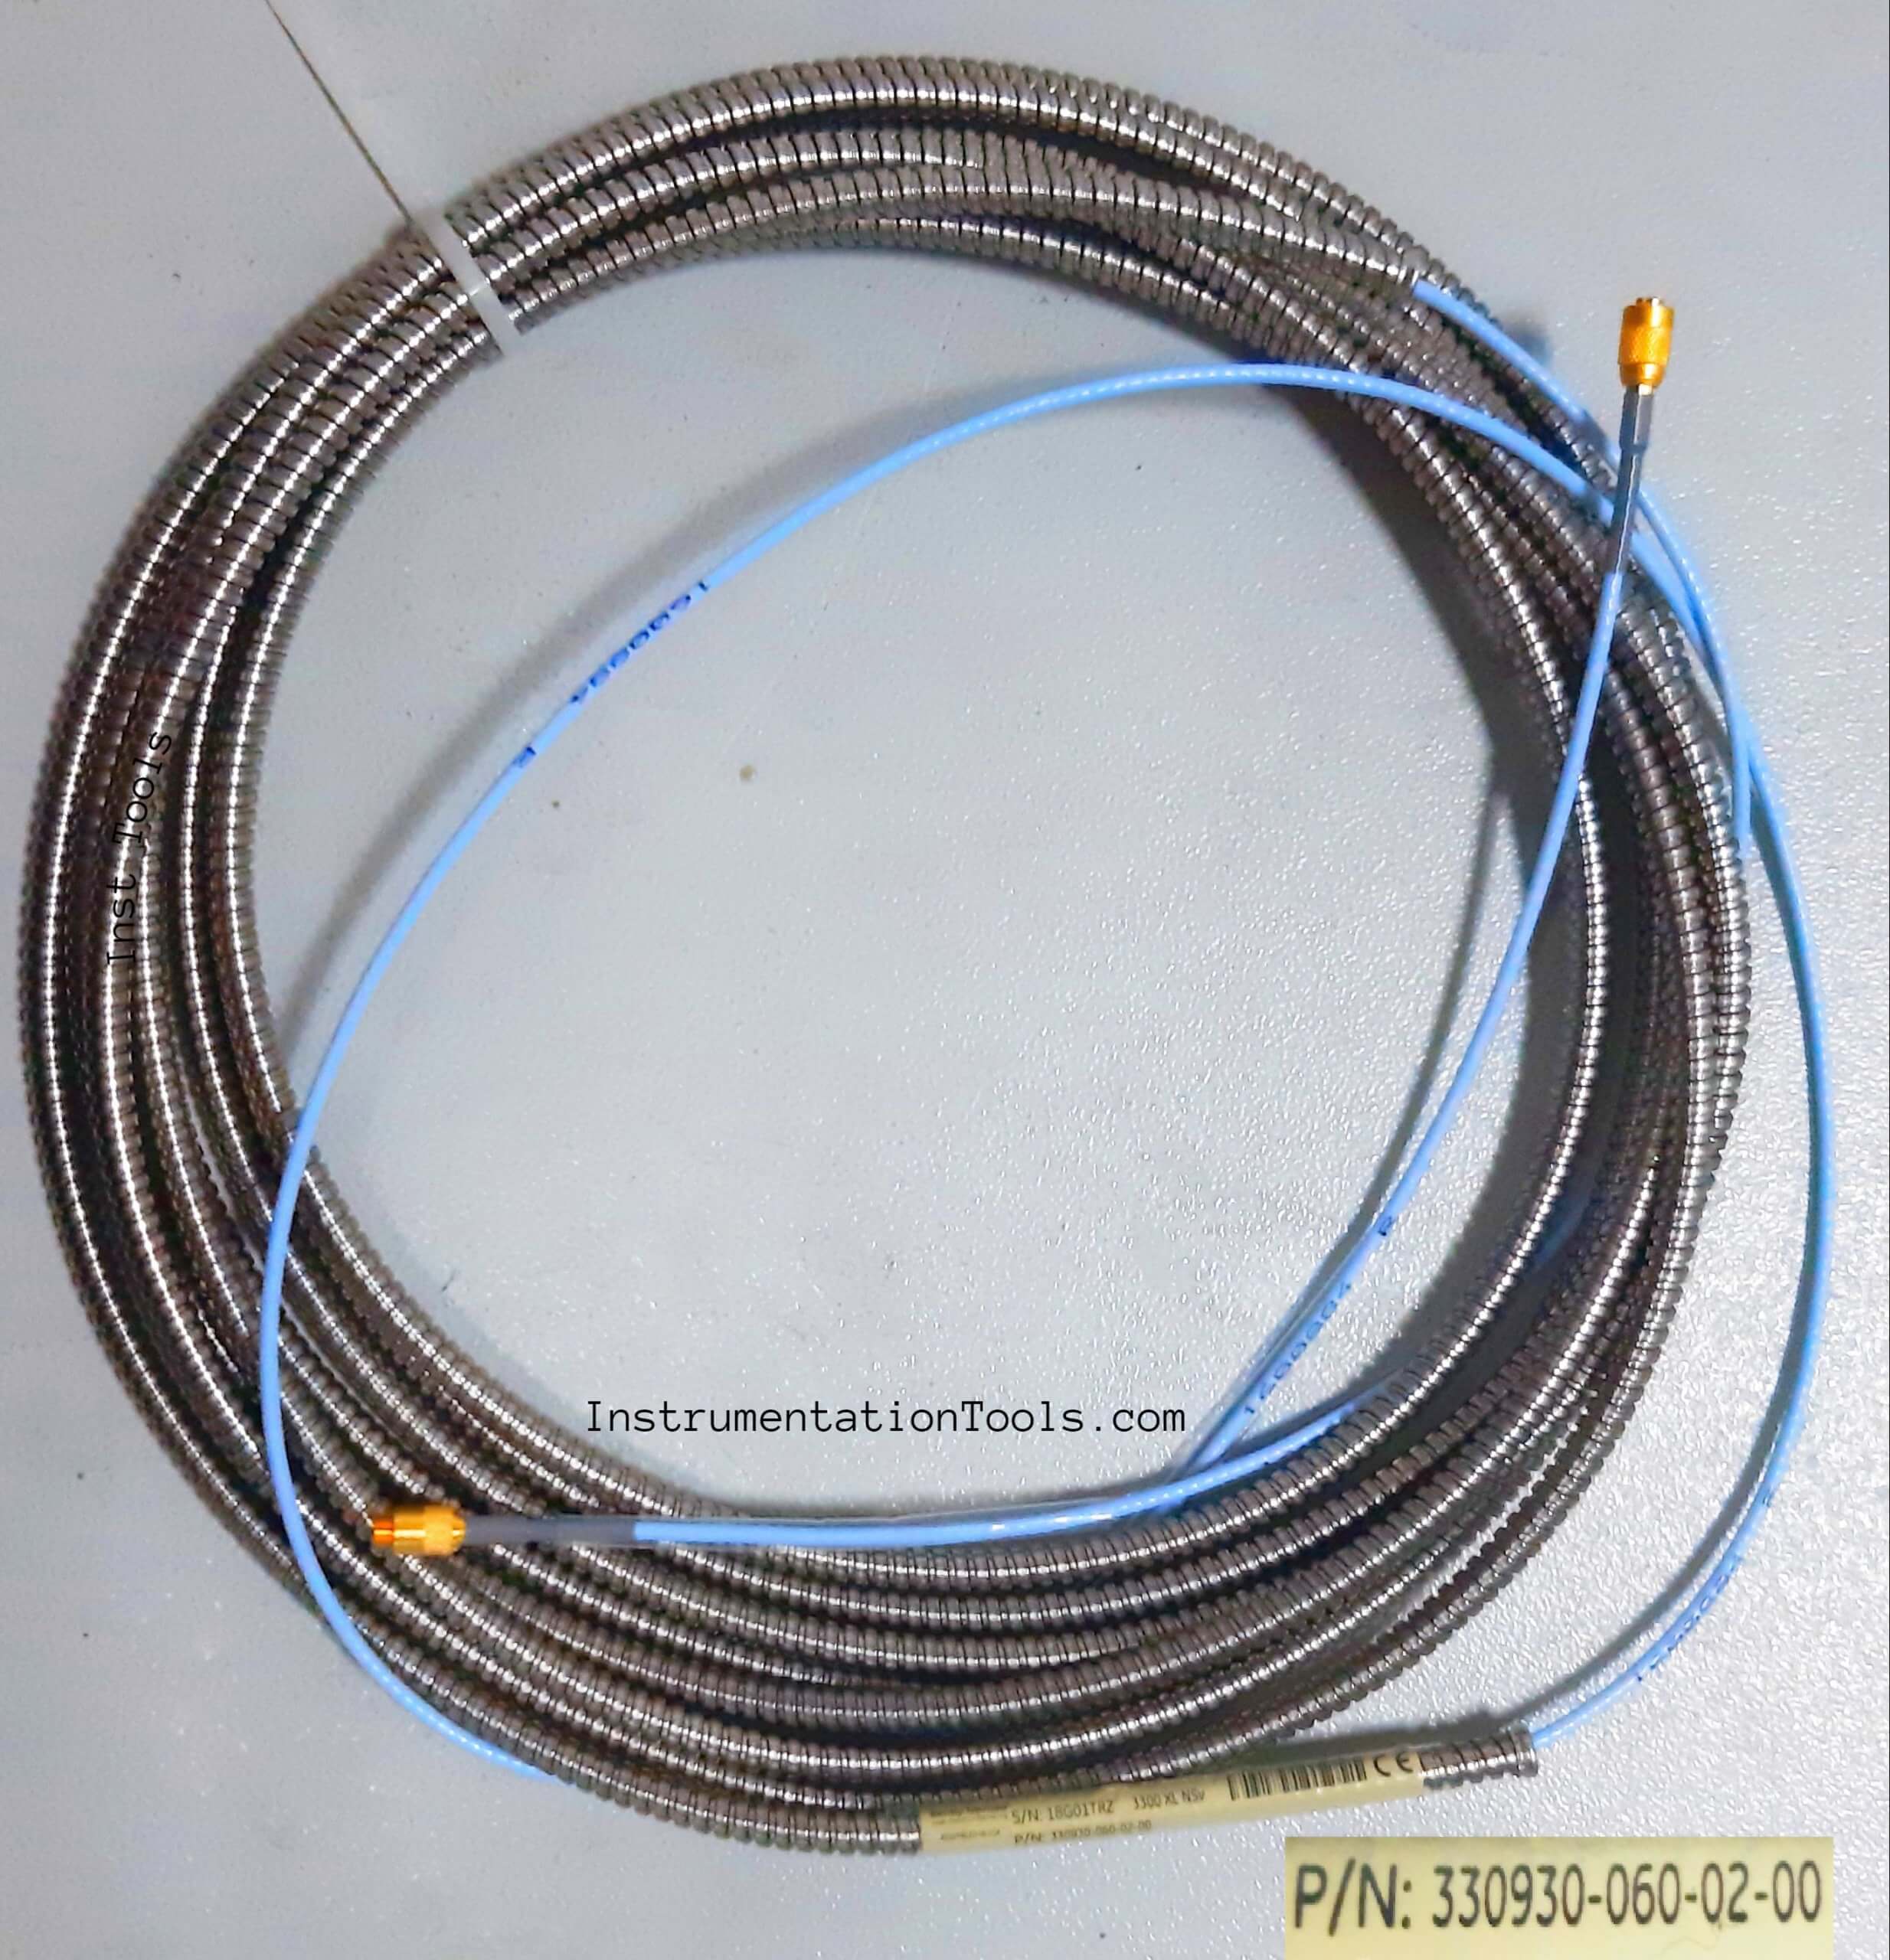 Cable Extension Bently Nevada